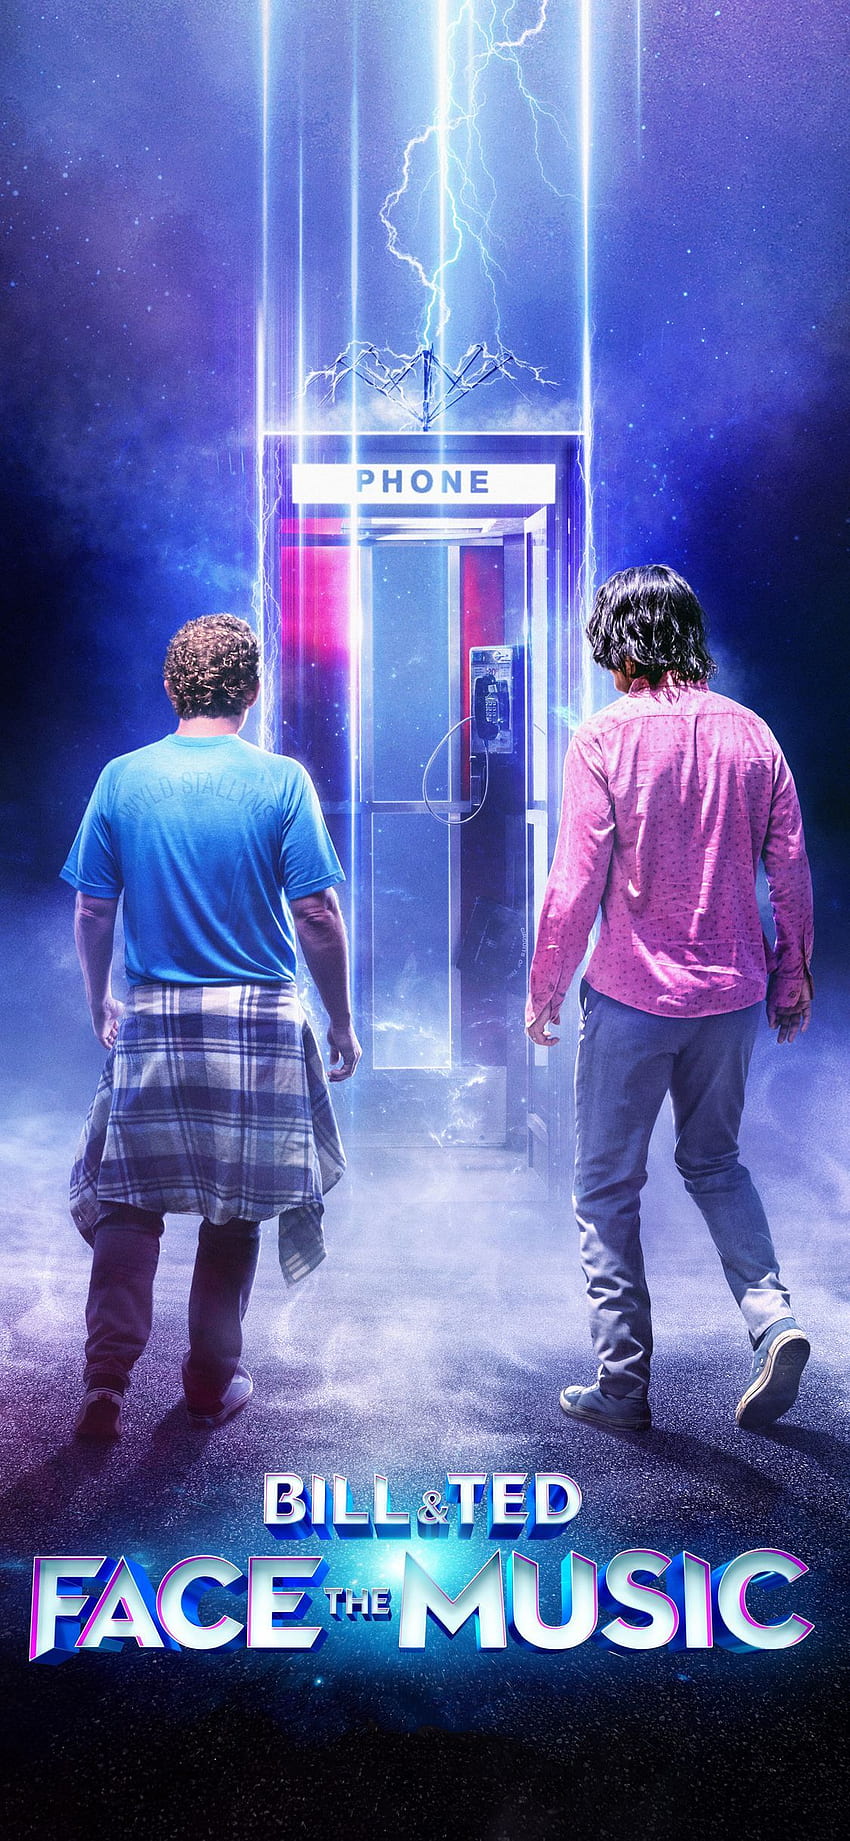 Bill & Ted Face The Music HD phone wallpaper